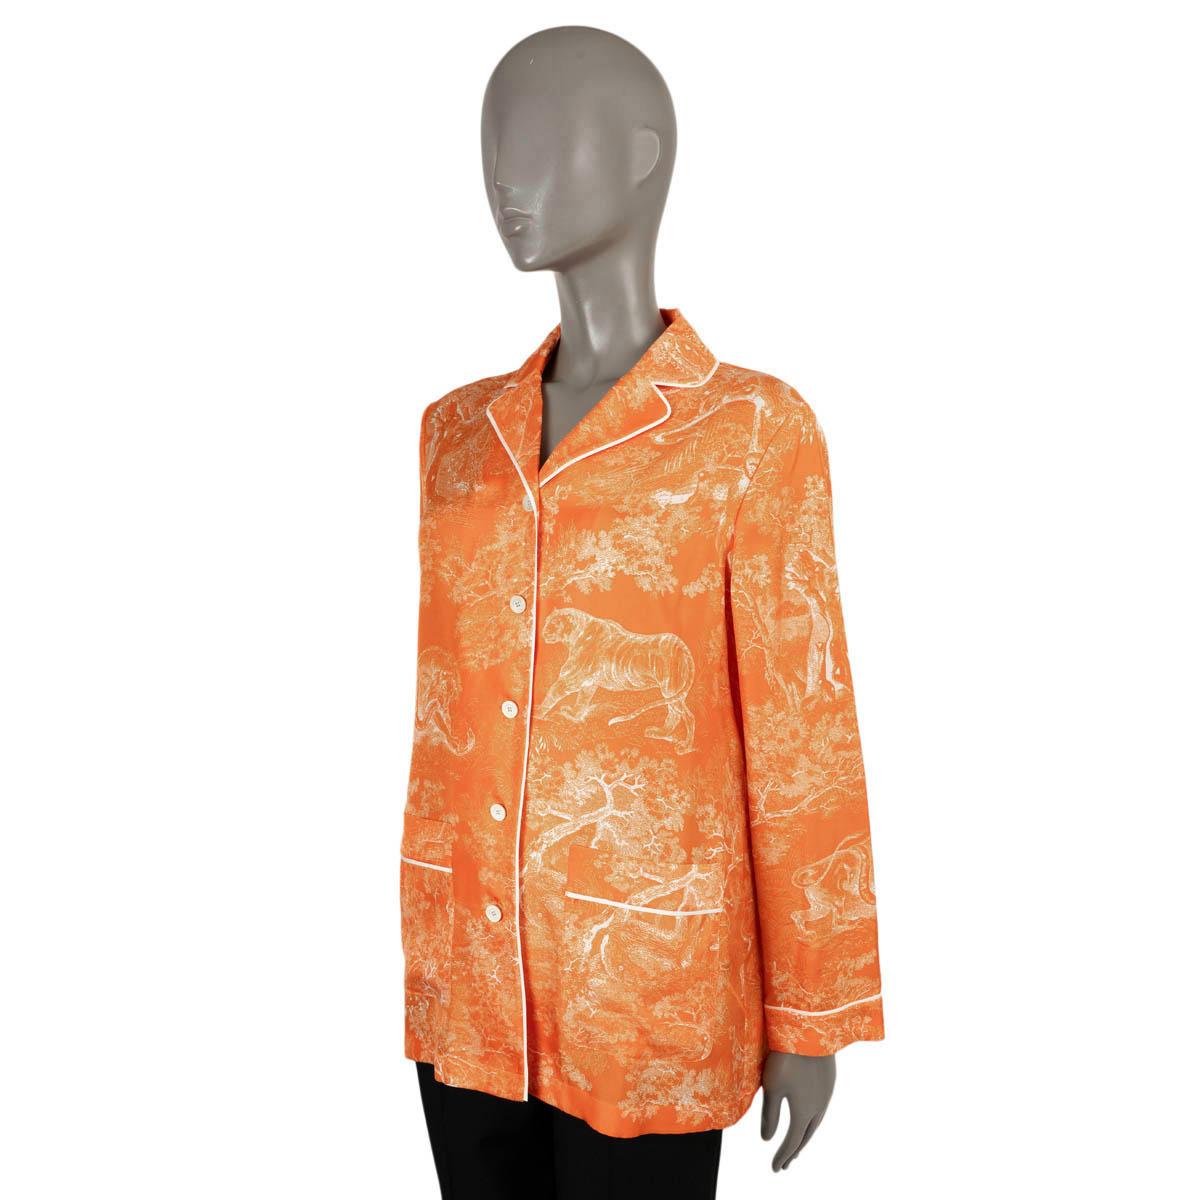 100% authentic Christian Dior pyjama shirt in fluorescent orange Toile de Jouy Reverse silk twill (100%). Features contrasting white piping and two pockets. Closes with buttons on the front and is unlined. Have been worn and are in excellent